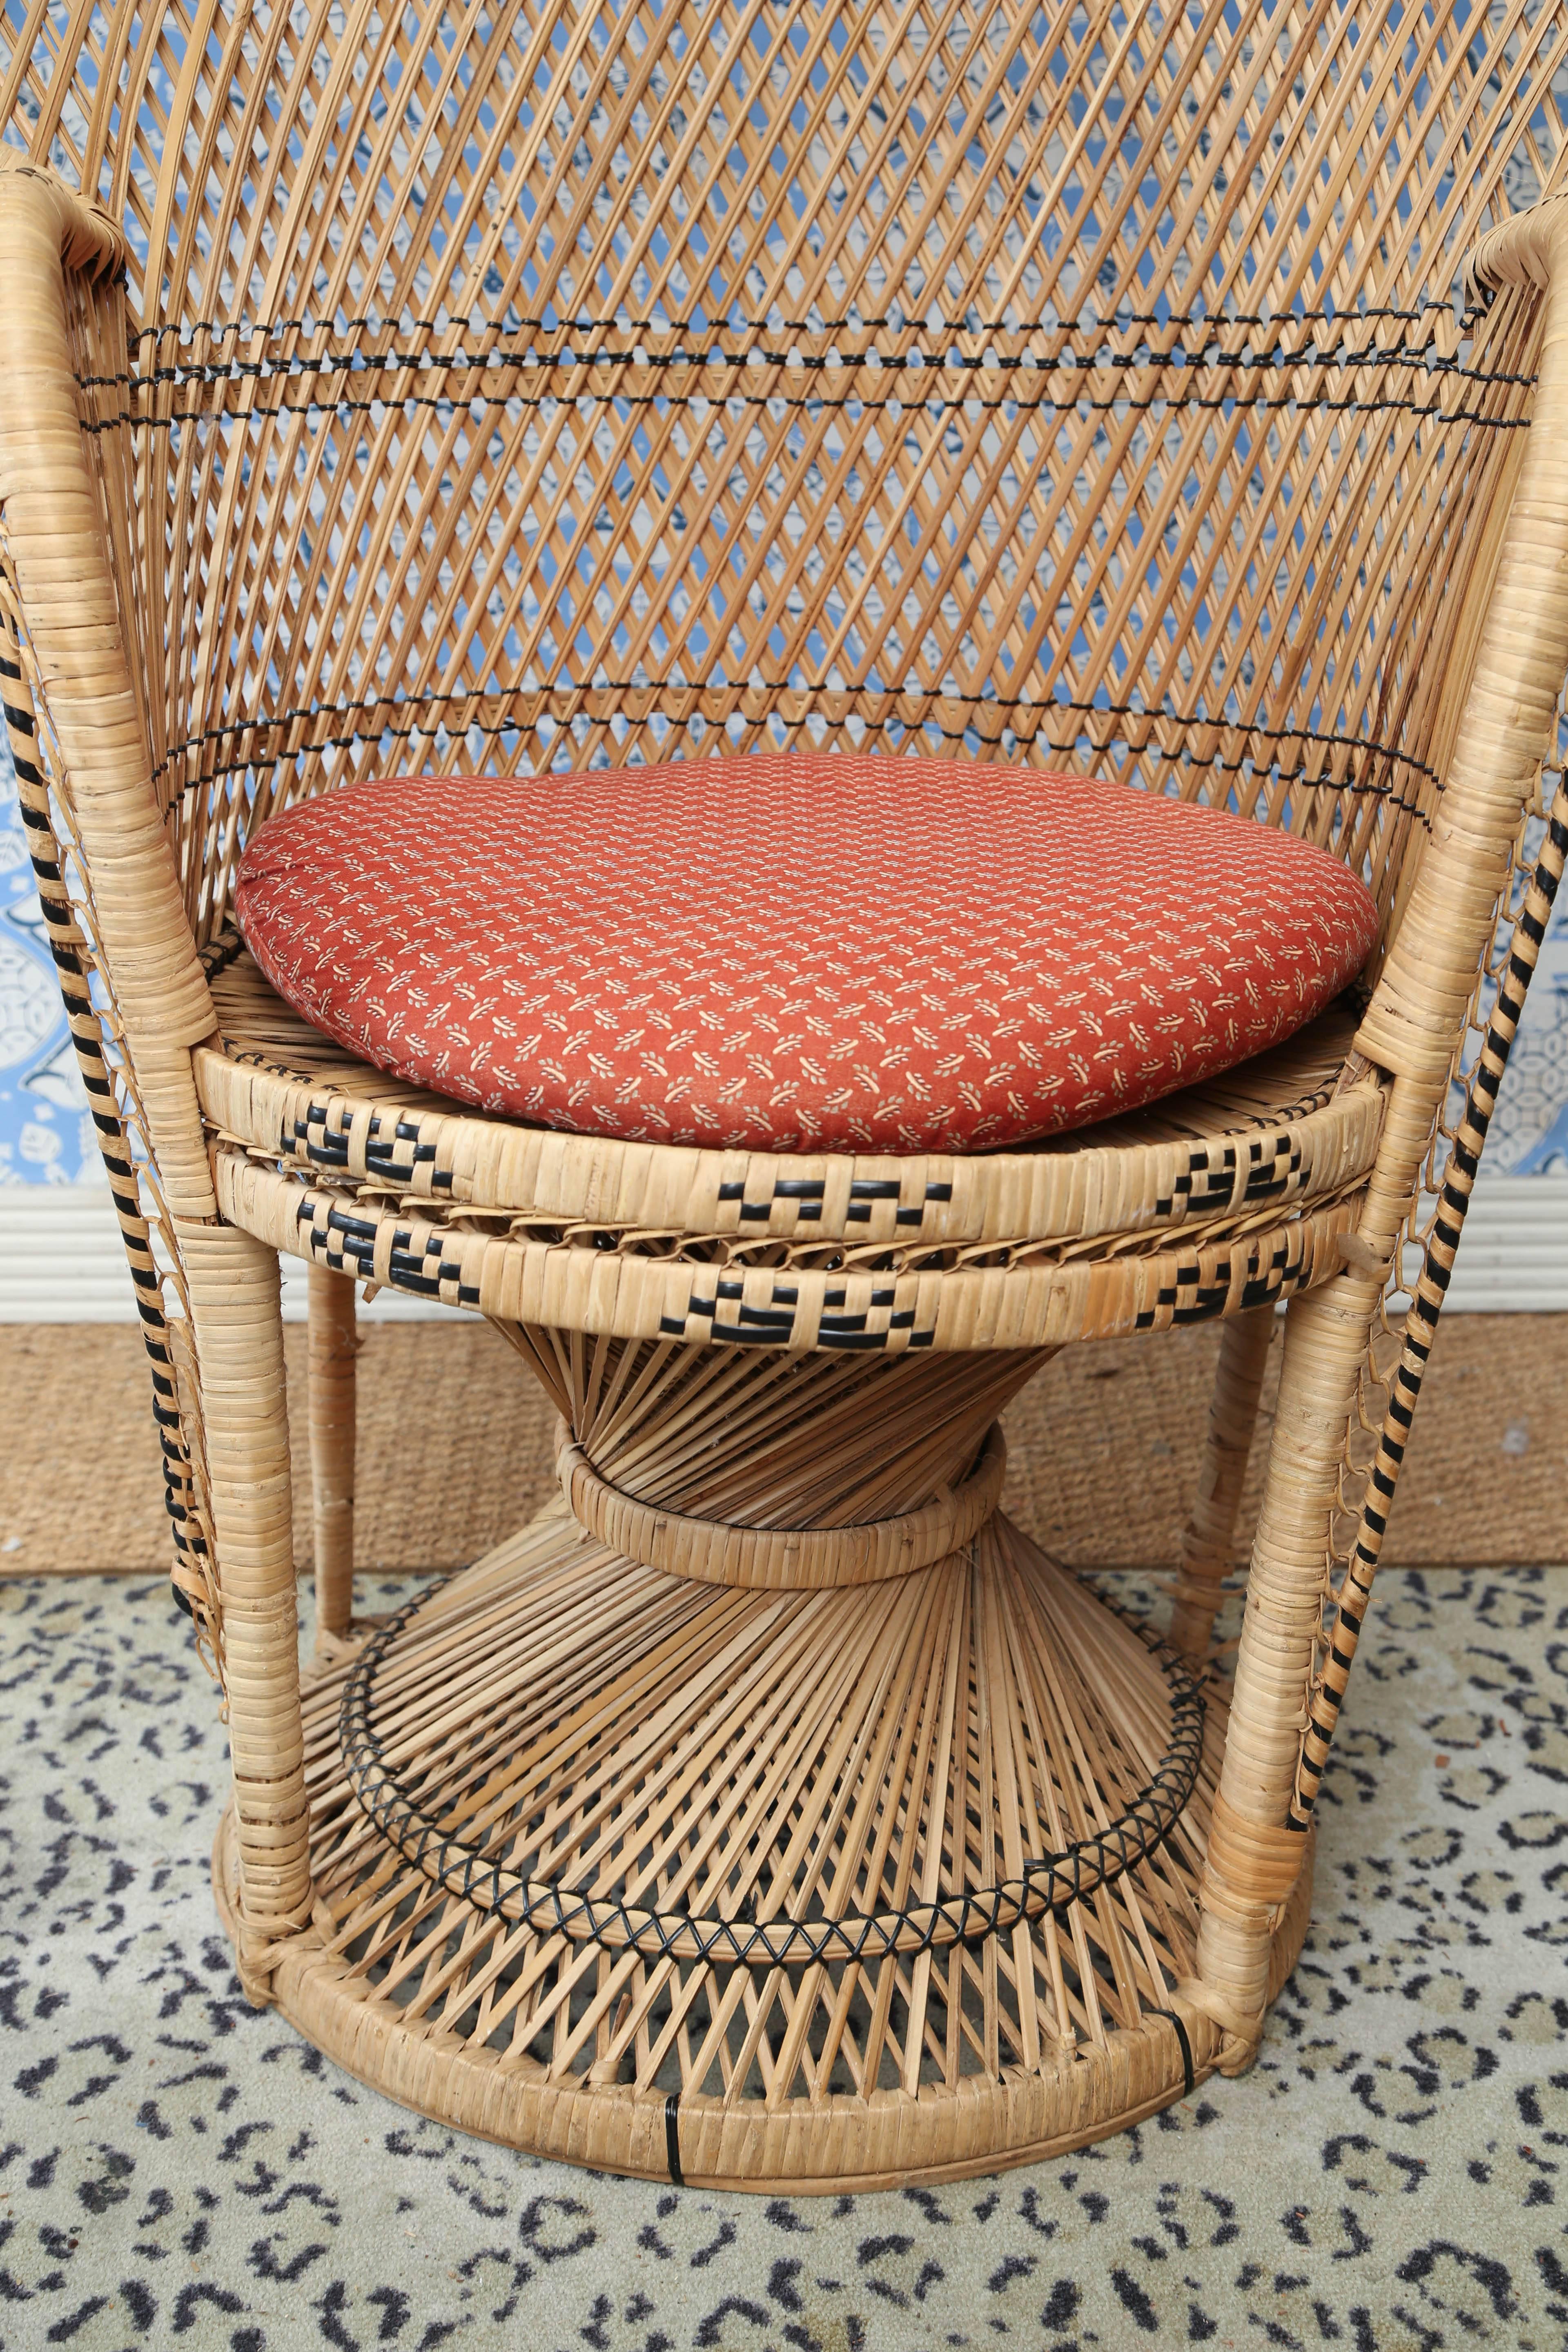 One rattan Peacock chairs: Measures: 42